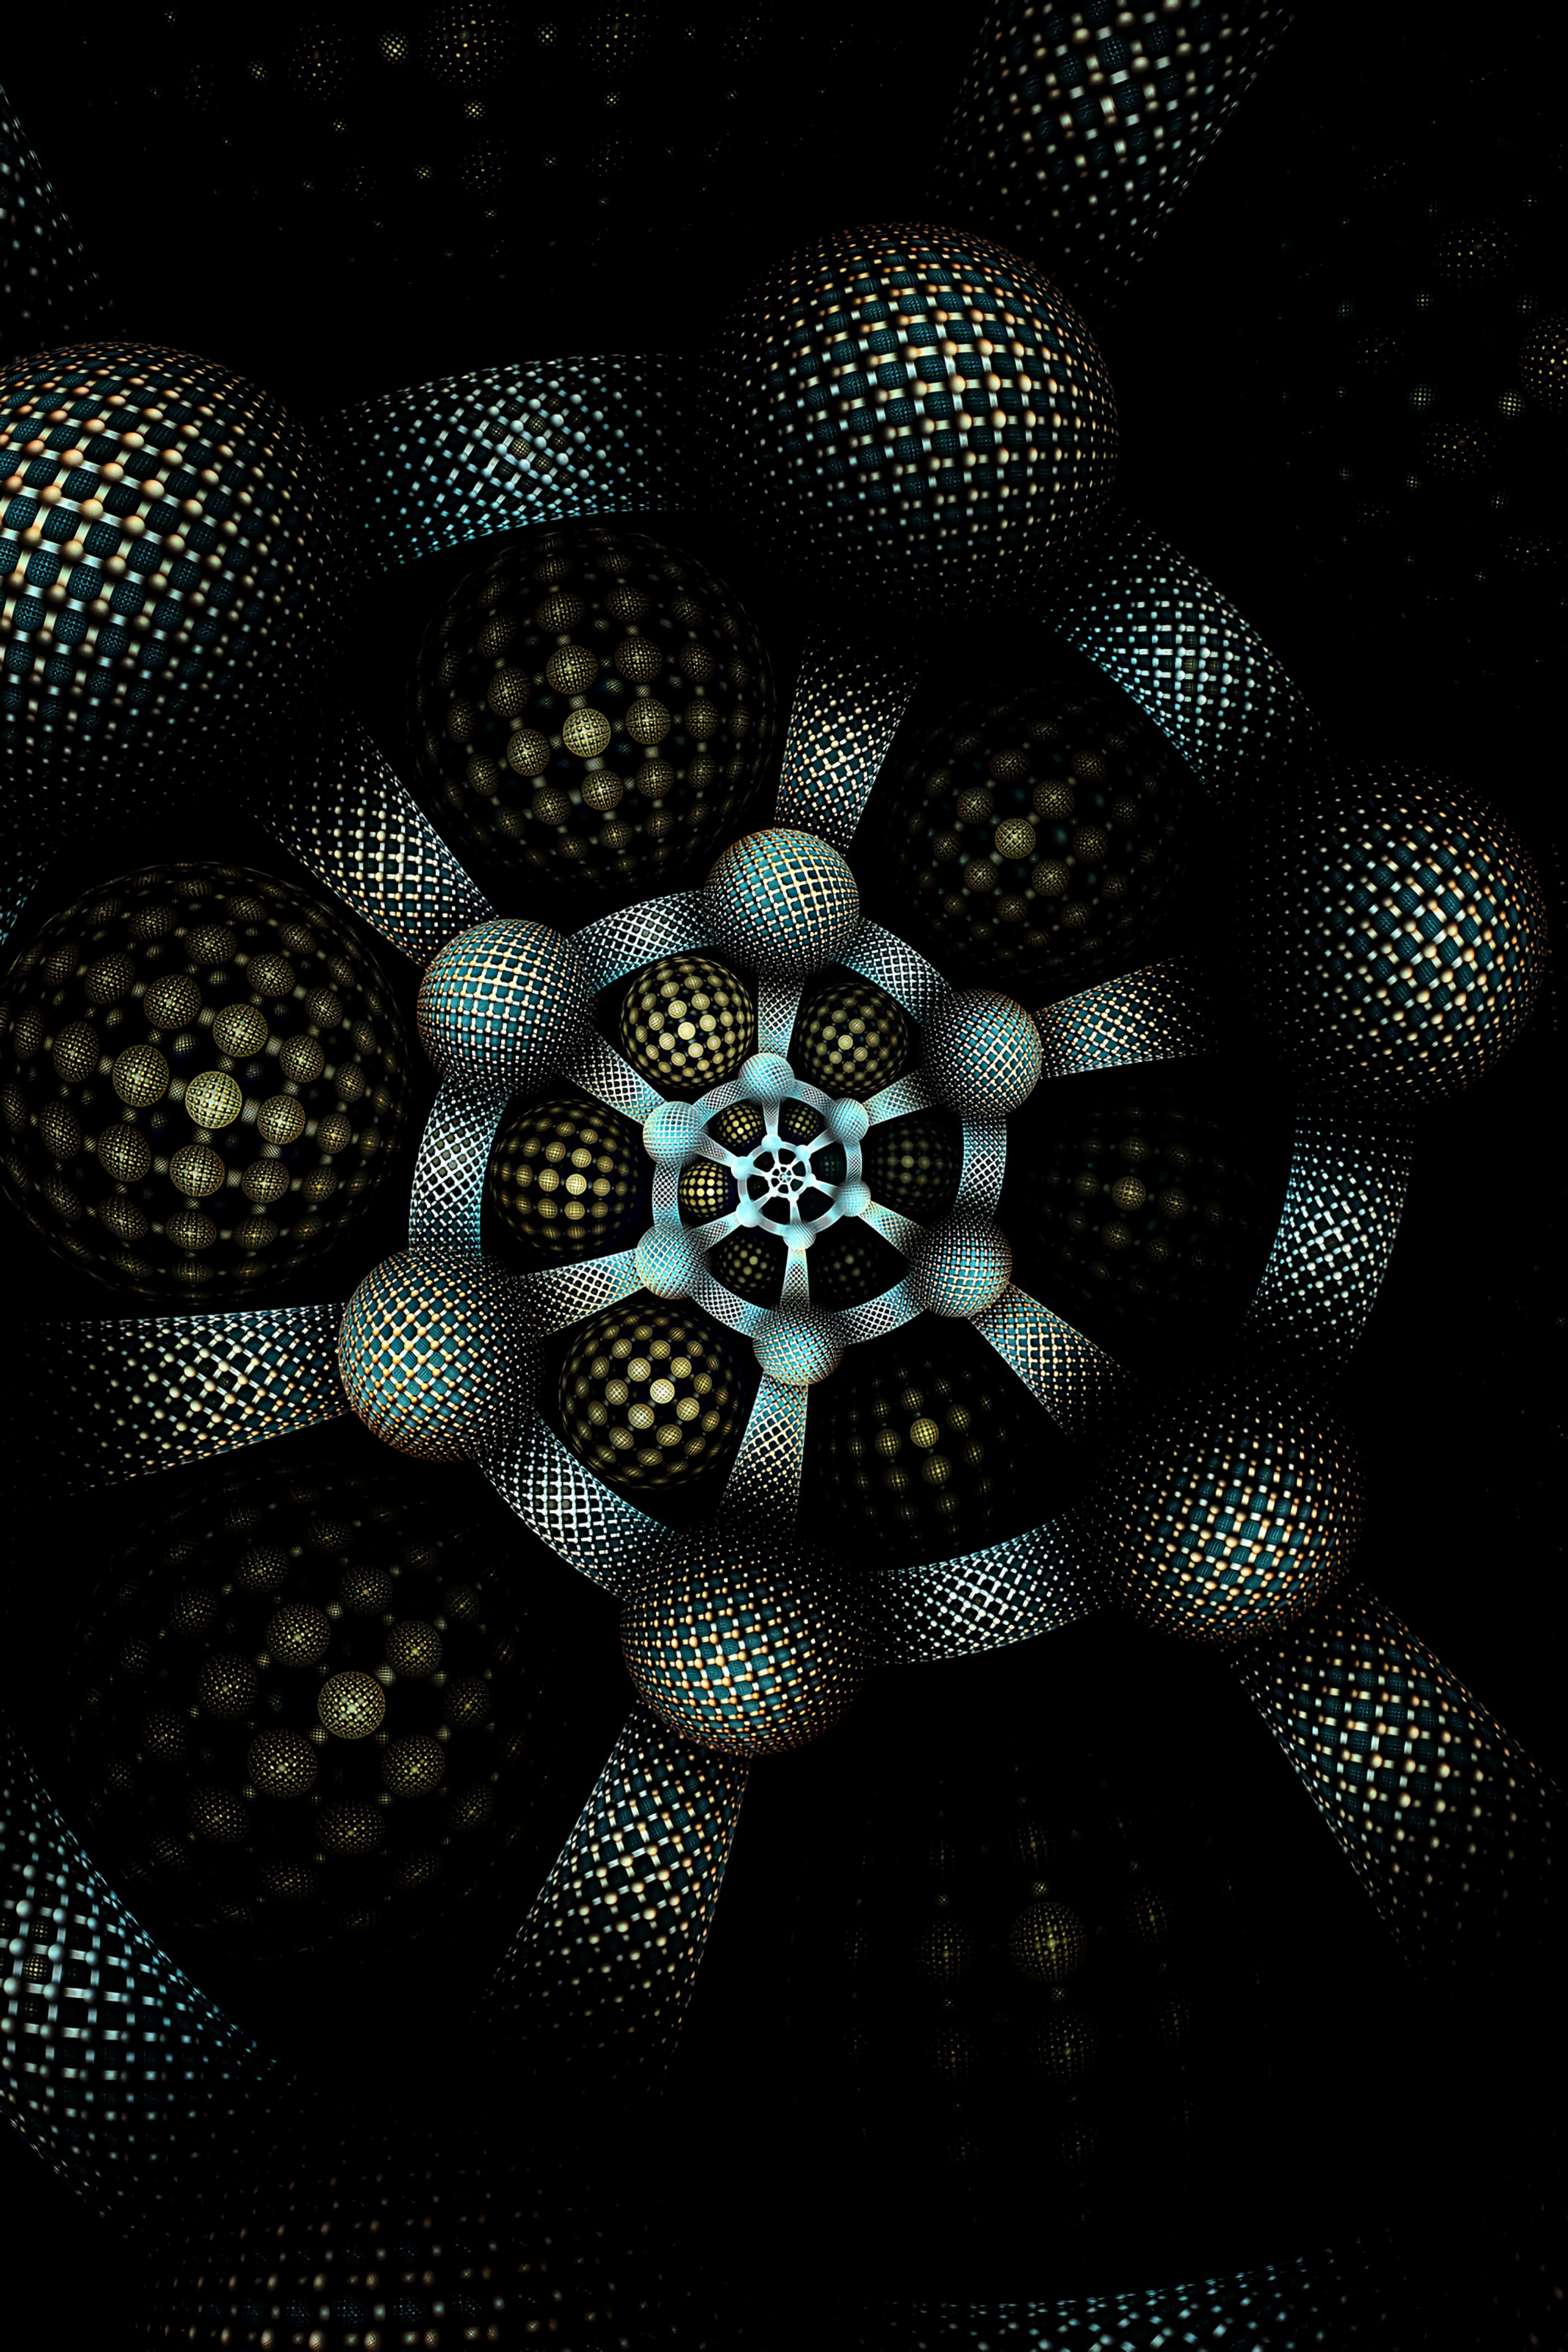 form, abstract, dark, circles, pattern, fractal, swirling, involute